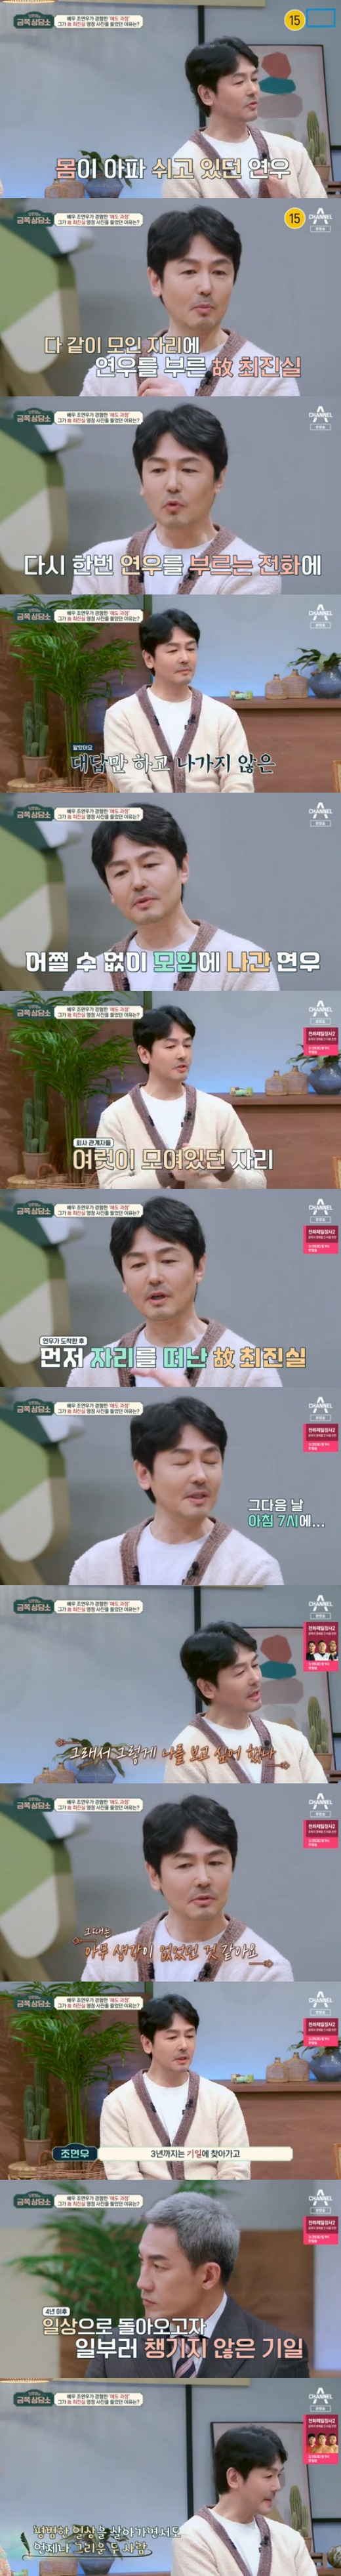 In Oh Eun Youngs a gold piece a counseling center, actor Jo Yeon-woo opened the sadness of leaving the late choi jin-sil and Choi Jinyoung siblings.In the 74th episode of Oh Eun Youngs a gold piece a counseling center broadcasted on the afternoon of the 24th, Jo Yeon-woo and Han Jung-soo, who suffered from the loss of their best friends, respectively, appeared in the late choi jin-sil and late Kim Joo- did.On this day, Jo Yeon-woo said, Ive never said it on the air. Im careful, but when Choi jin-sil sister died, I was close enough to hear a portrait of the deceased.(Choi)Jinyoung heard a portrait of the deceased because his brother talked about it.Some people said, Whats the relationship with choi jin-sil? (Choi) The truth sister got to know me because of Jinyoung, and she took good care of me.At that time, when I was working hard, Sister said, Lets work together, and I often saw the scout offer that I made an office. I was the first person to lead me first, and it was the first time I felt cared for. Sister told me, Why does everyone in my family like you so much?Jinyoung also likes me, and when my family comes together, he talks about me and praises me a lot. He saved me so much. Jo Yeon-woo said, The day before that day, I was resting at home because I was sick. I got a phone call from Sister around 5 pm.I can not go out today, Sister said. I refused to say sorry, but after 2 to 30 minutes, I got another phone call. I really want to see you today. I thought I had a glass of beer.I thought I should go out, but I did not go. After that, the phone seemed to have come five times. From 5 pm to 9 pm. So I thought I should not go out, so I went out at 9 oclock. Several company officials including representatives were gathered.Sister was a little drunk. There was not much to say. After a few words, 10 to 20 minutes after I arrived, sister went away. The next morning at 7 oclock, I received a call from my representative.And on the other hand, he also said, Is that why you called me? I thought about what I would have done if I hadnt gone out. But two years after that, there was Jinyoungs accident. I was so tired that I had no idea.He said, I thought I was going to spend three years in my heart. I went to the anniversary until three years, and I did not go to the fourth year. I had to take care of my parents. I got married a year after that, and I had no choice but to overcome it.But if you really shake it off, you do not want to see it, you do not feel sad, or it is not like this. In the 1990s, the best star of the day, choi jin-sil, died in 2008, and in 2010, his younger singer Choi Jinyoung died and saddened the public.